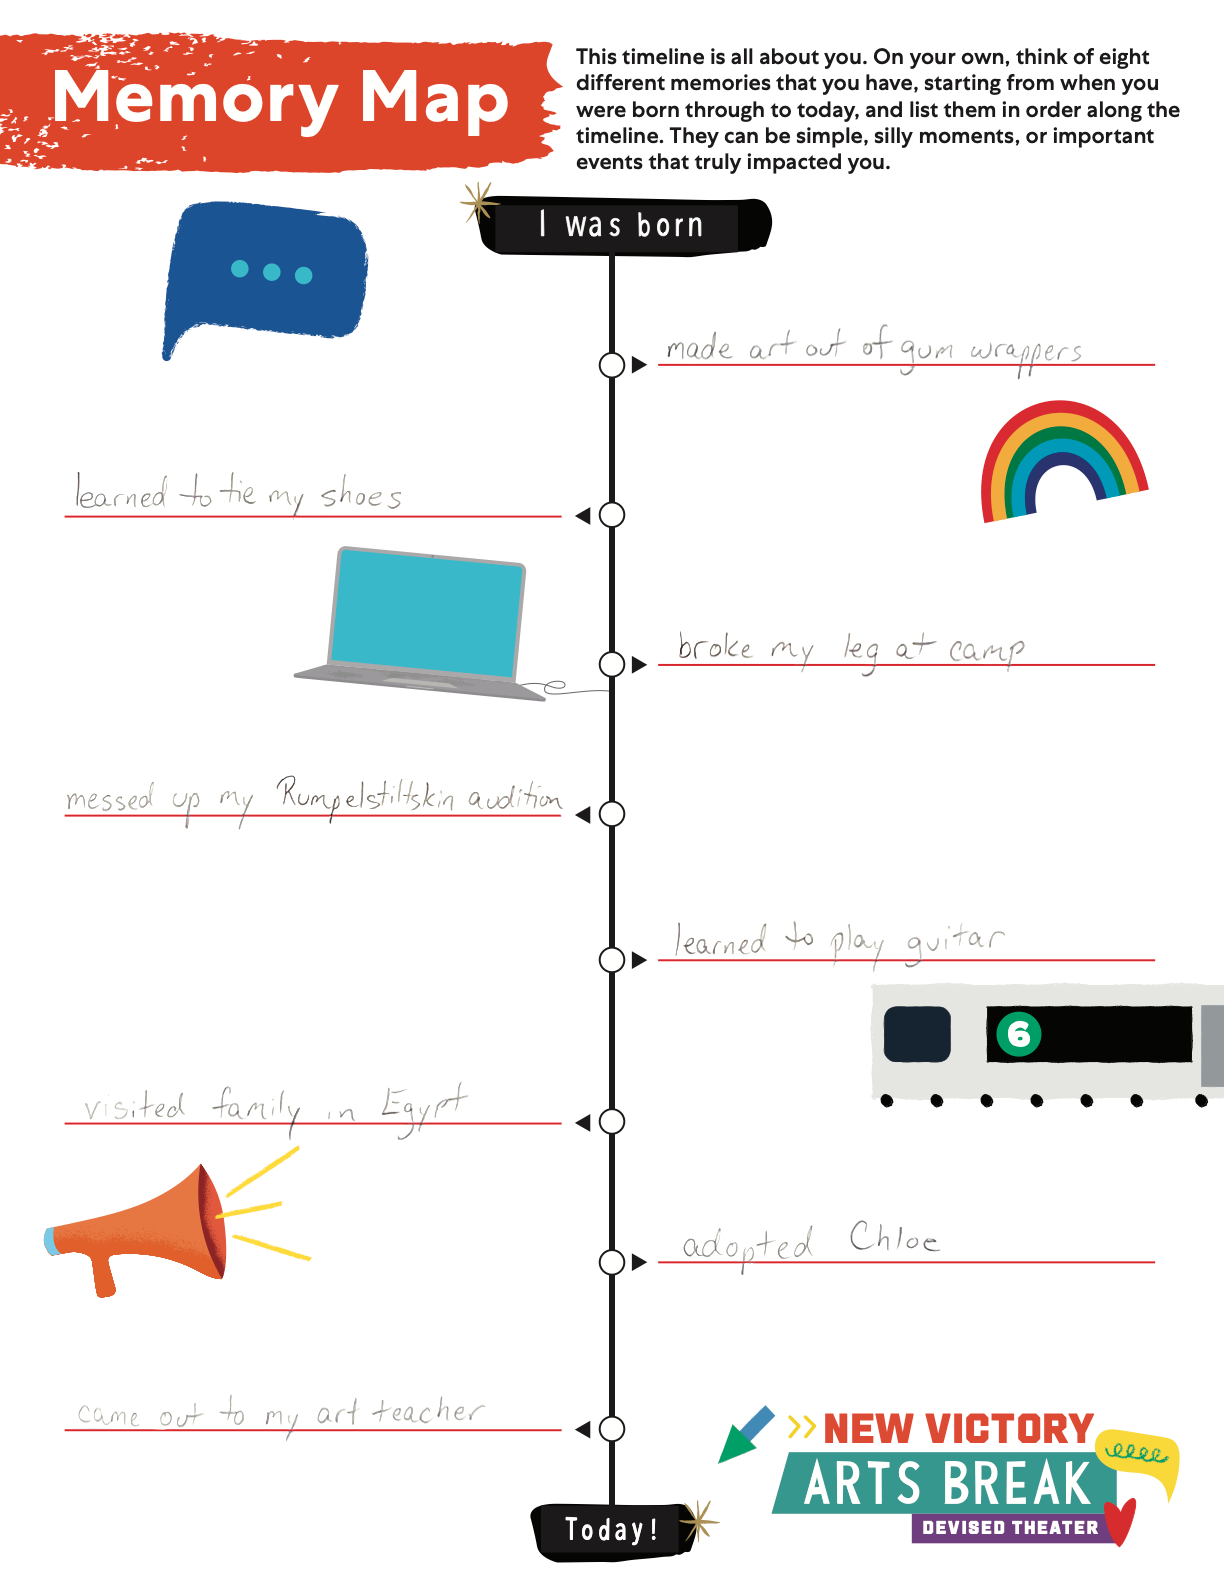 Memory Map timeline template filled out